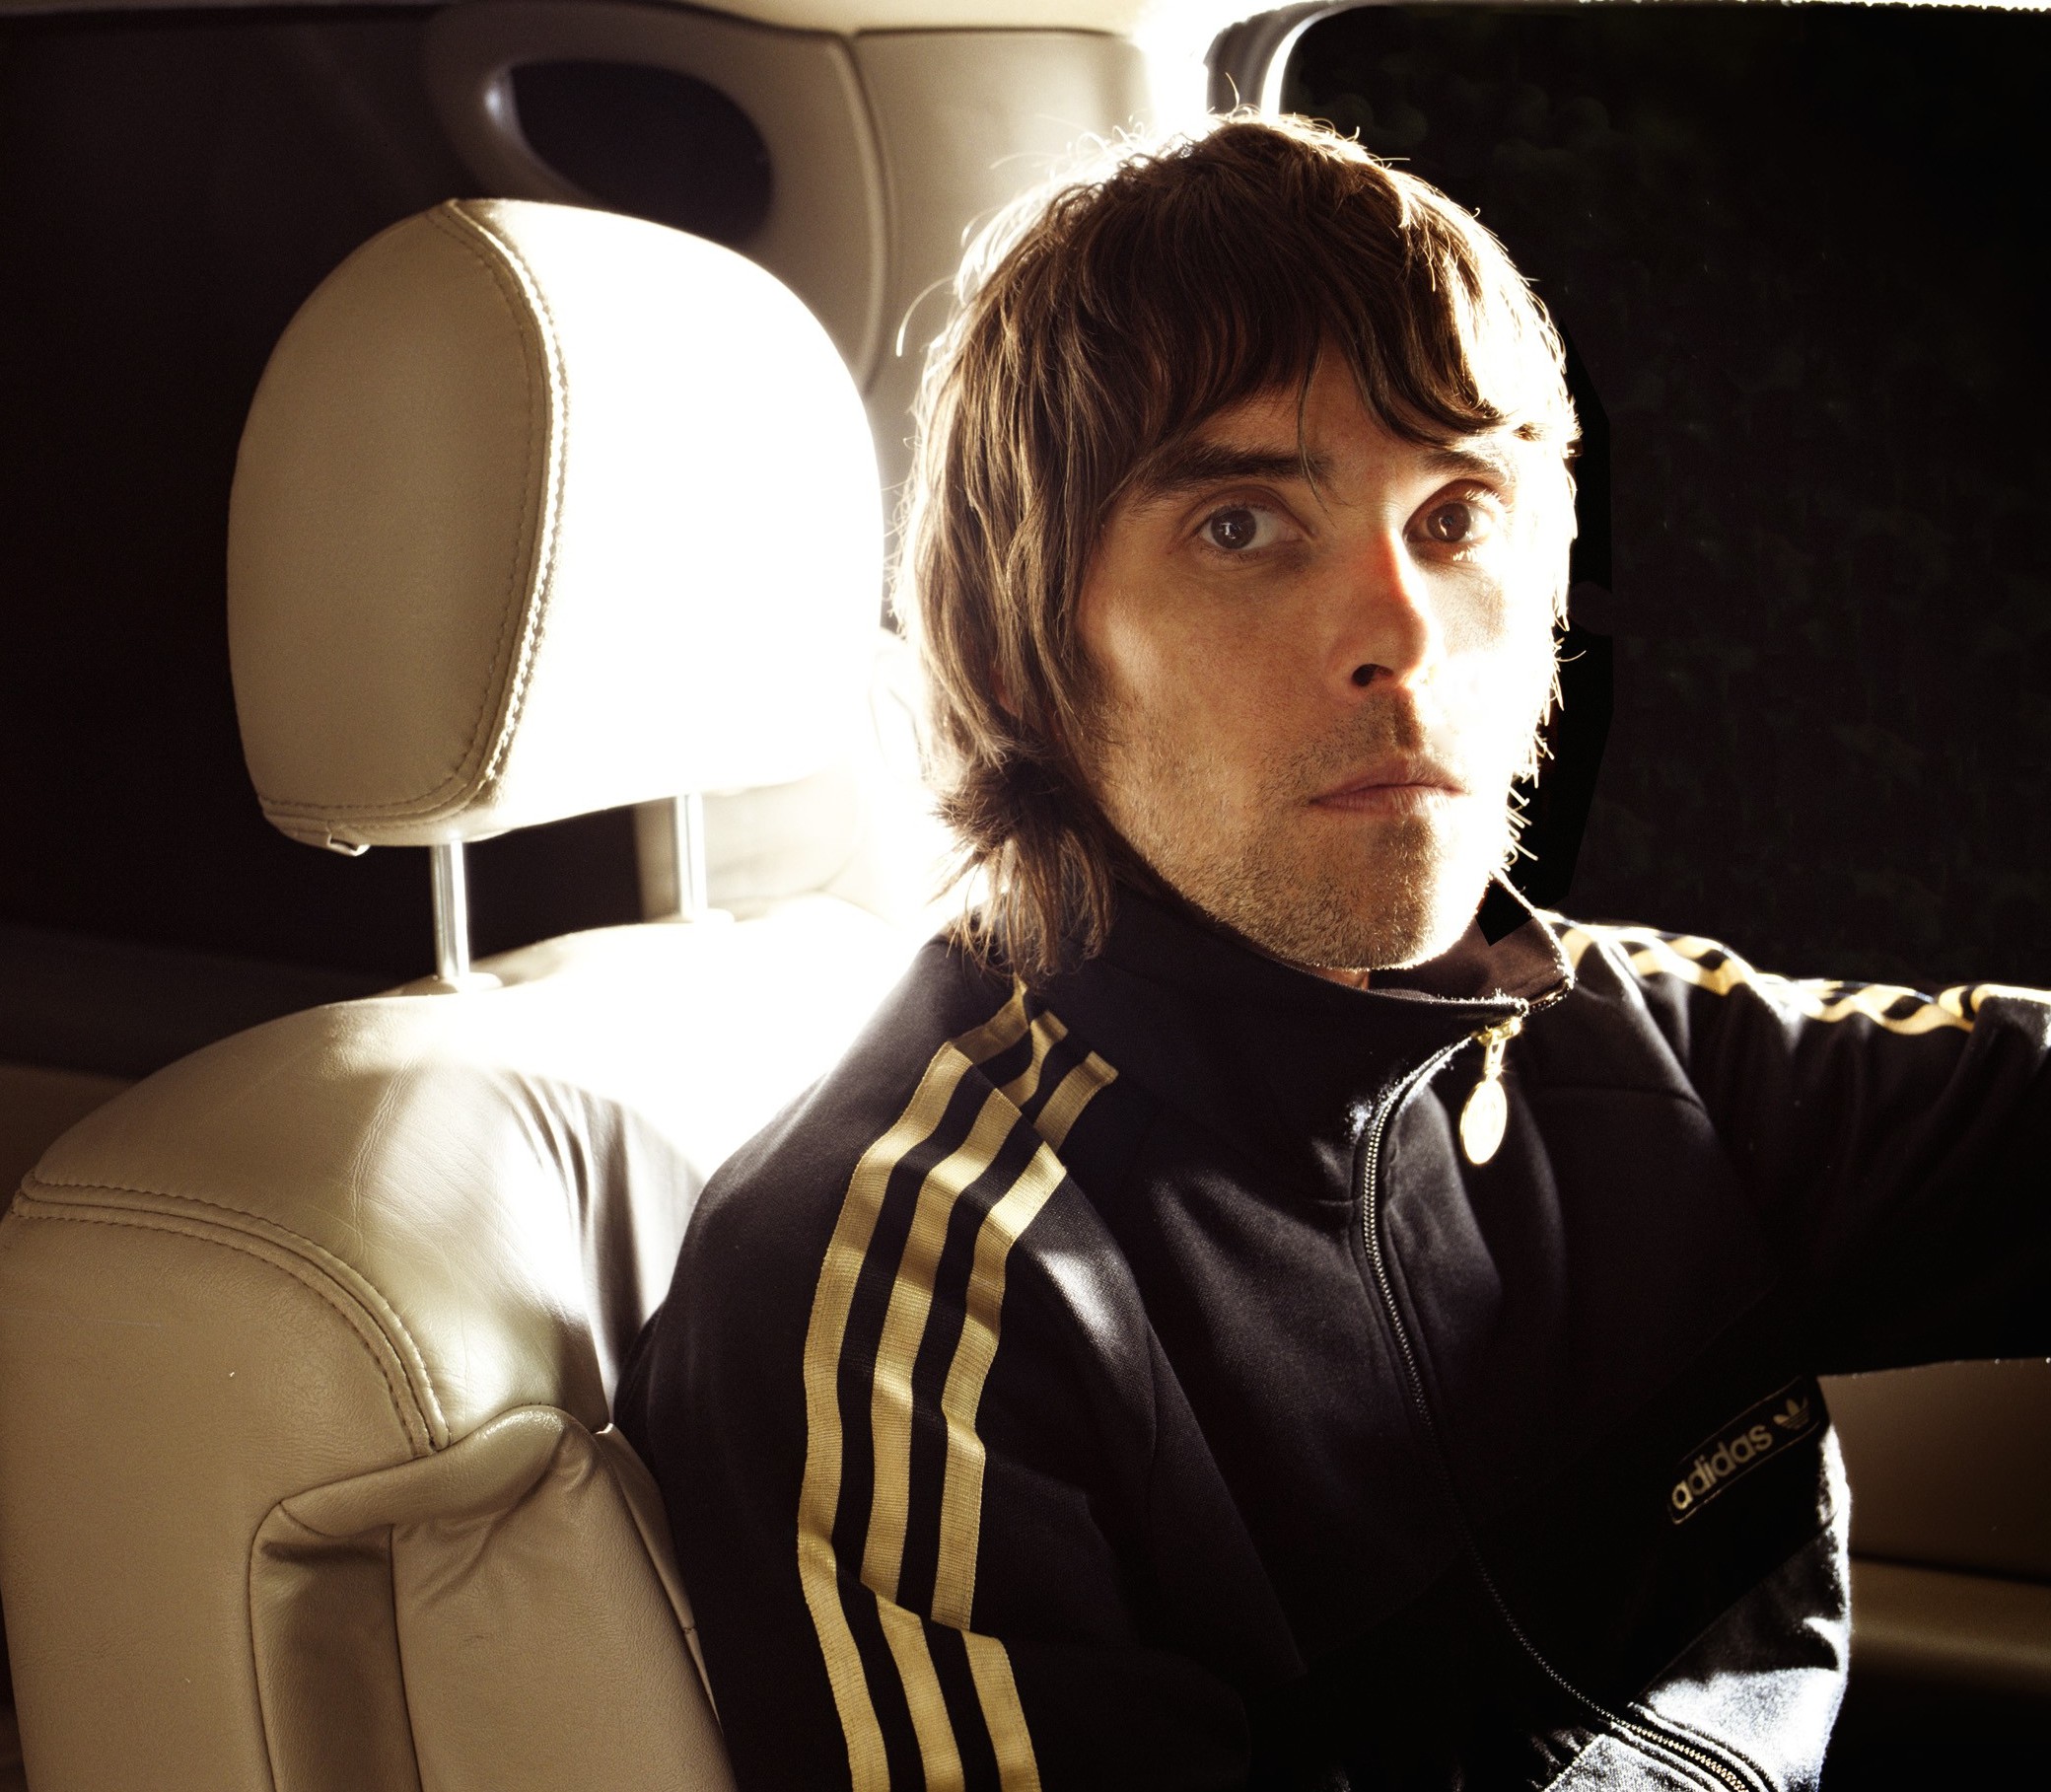 Ian Brown (photo by permission)